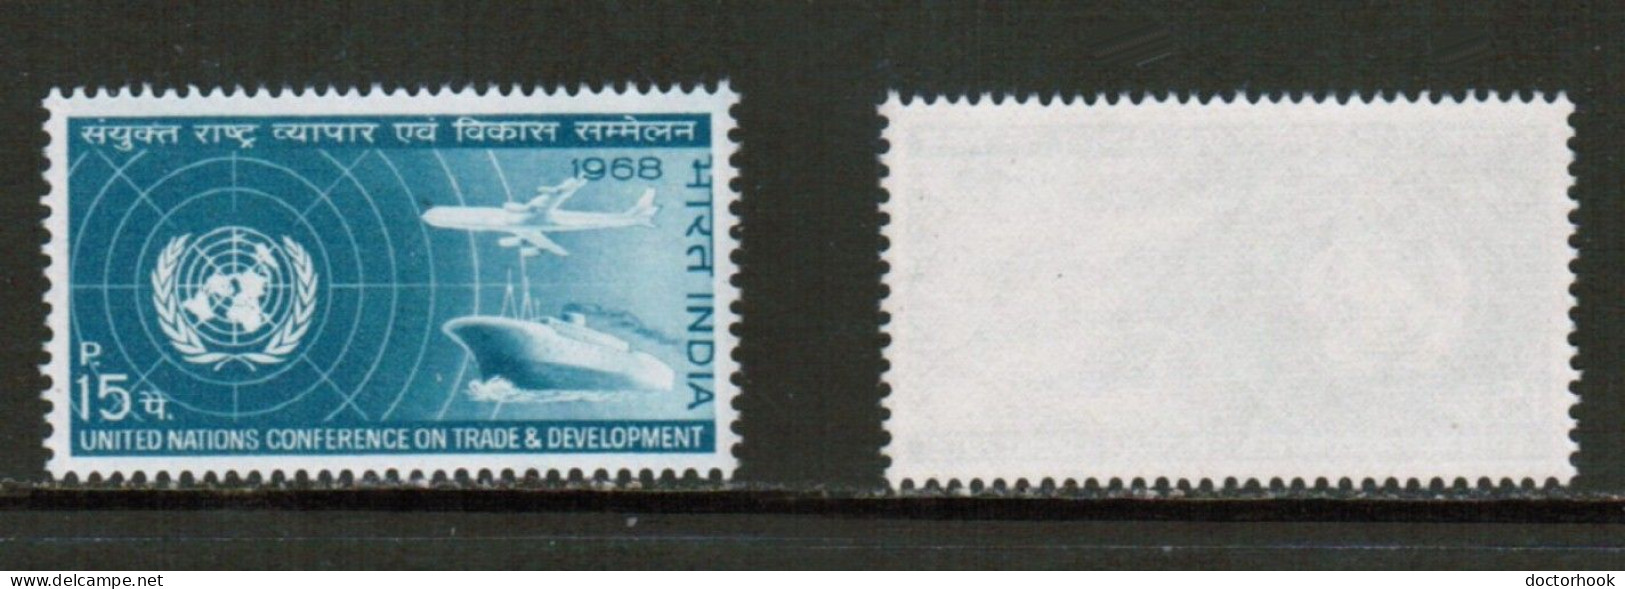 INDIA   Scott # 463** MINT NH (CONDITION AS PER SCAN) (Stamp Scan # 919-9) - Nuovi